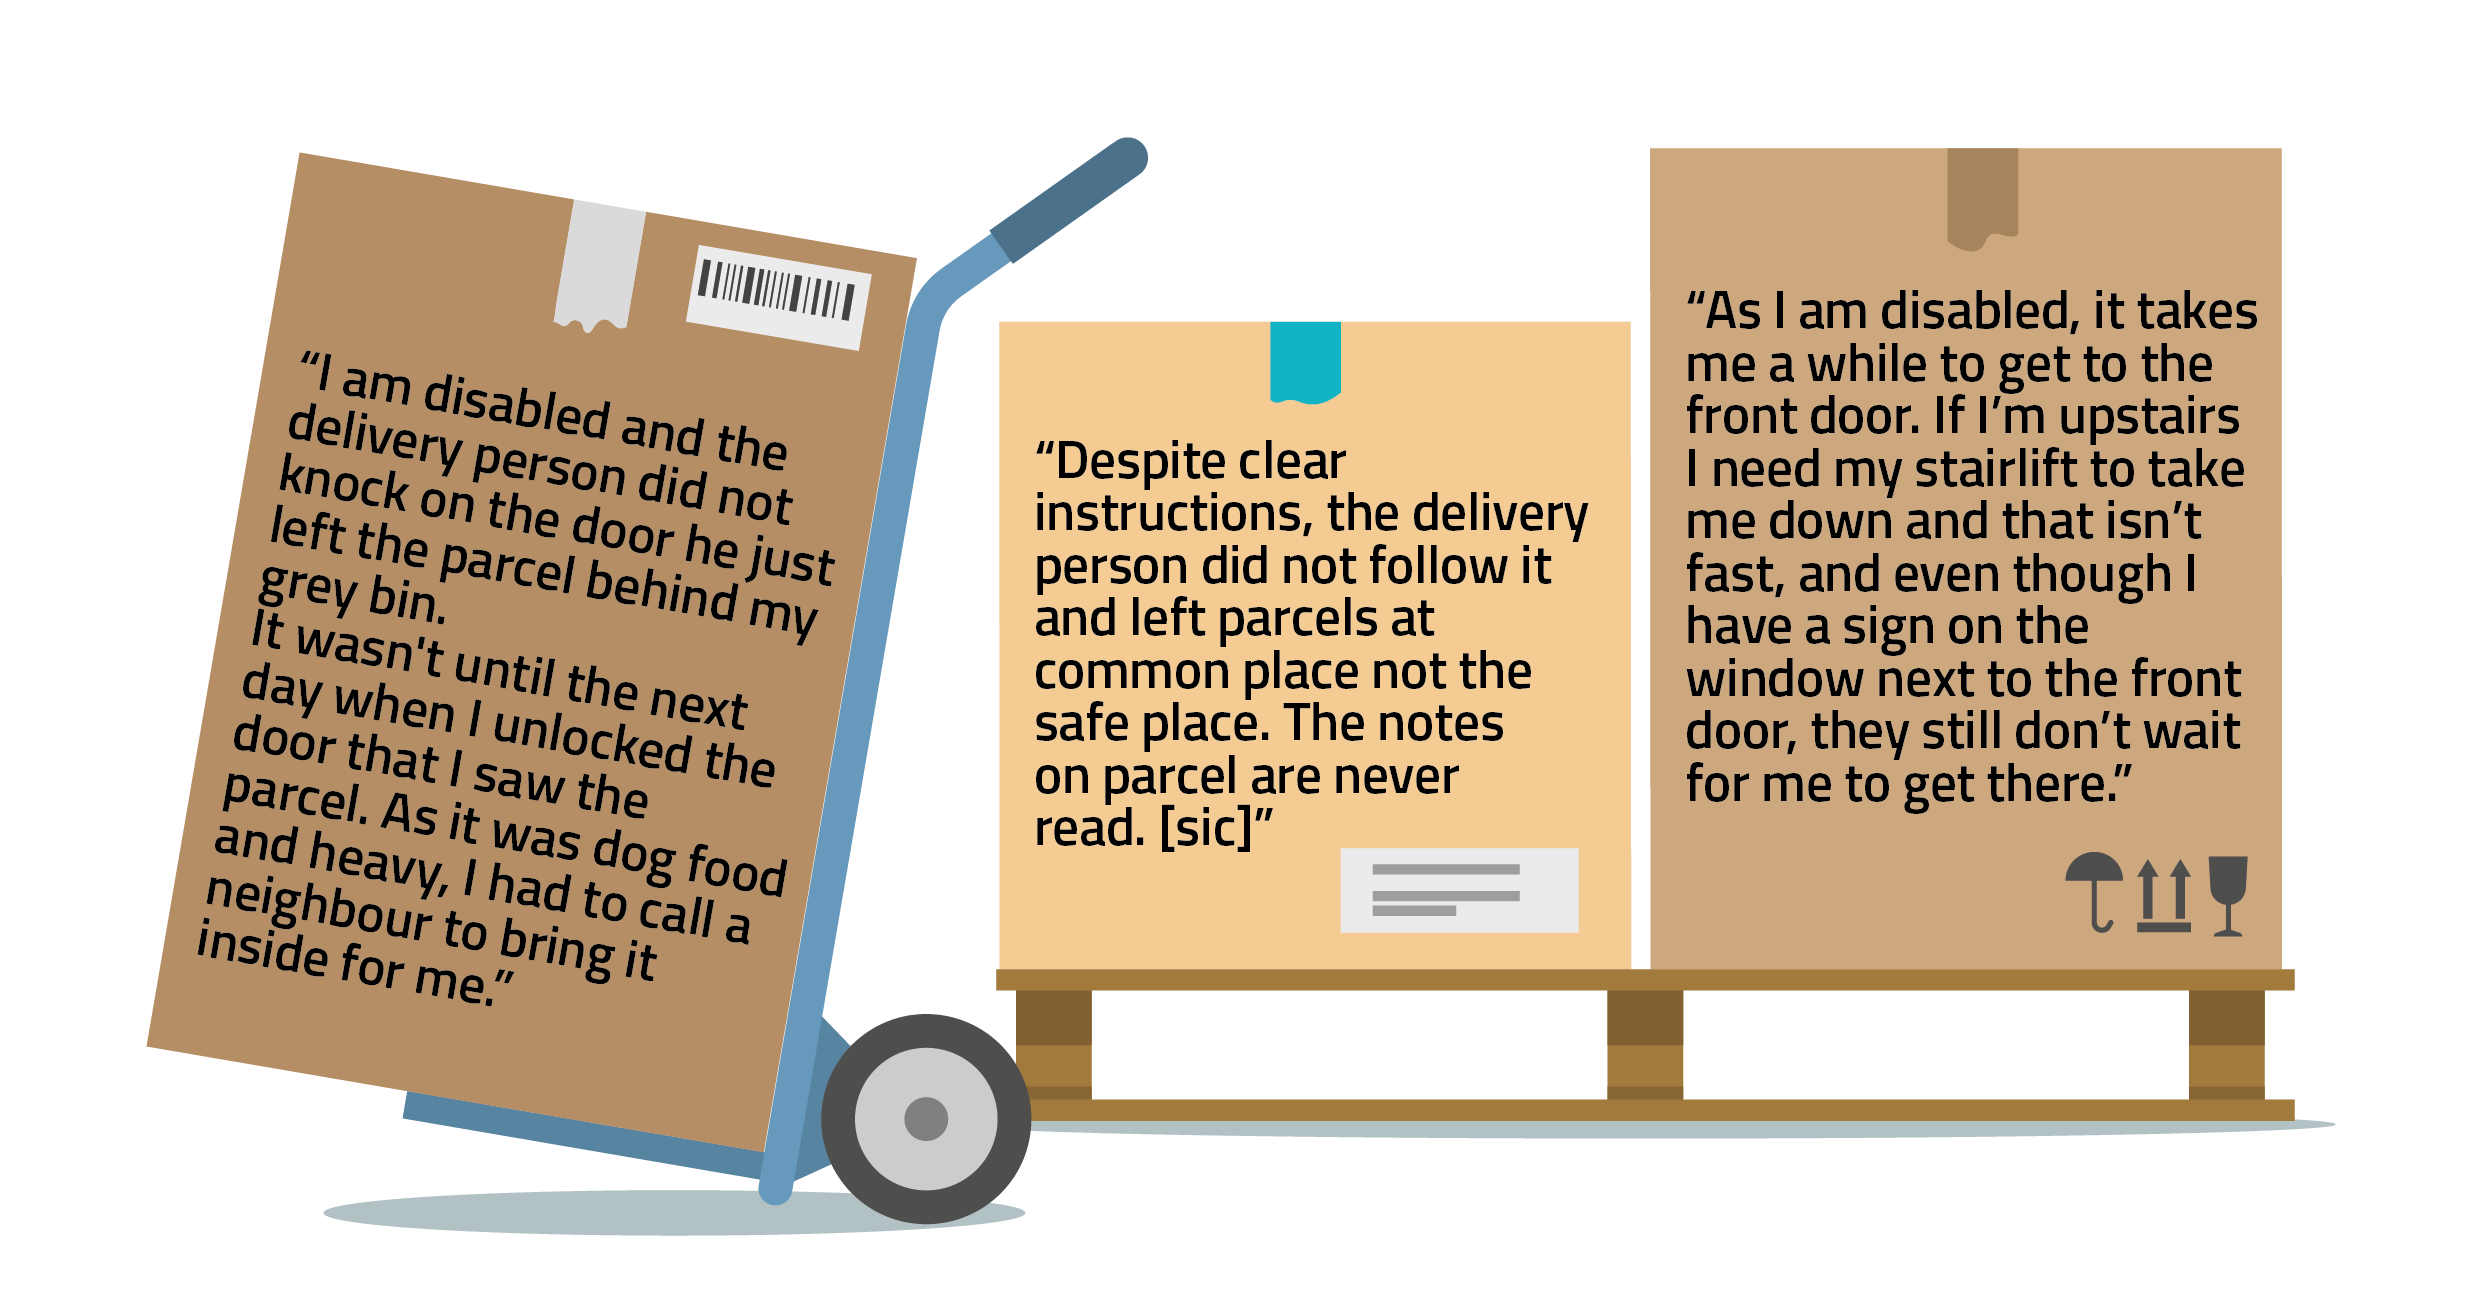 “As I am disabled, it takes me a while to get to the front door. If I’m upstairs I need my stairlift to take me down and that isn’t fast, and even though I have a sign on the window next to the front door, they still don’t wait for me to get there.”    “Despite clear instructions, the delivery person did not follow it and left parcels at common place not the safe place. The notes on parcel are never read.”    “I am disabled and the delivery person did not knock on the door he just left the parcel behind my grey bin. It wasn't until the next day when I unlocked the door that I saw the parcel. As it was dog food and heavy, I had to call a neighbour to bring it inside for me.”